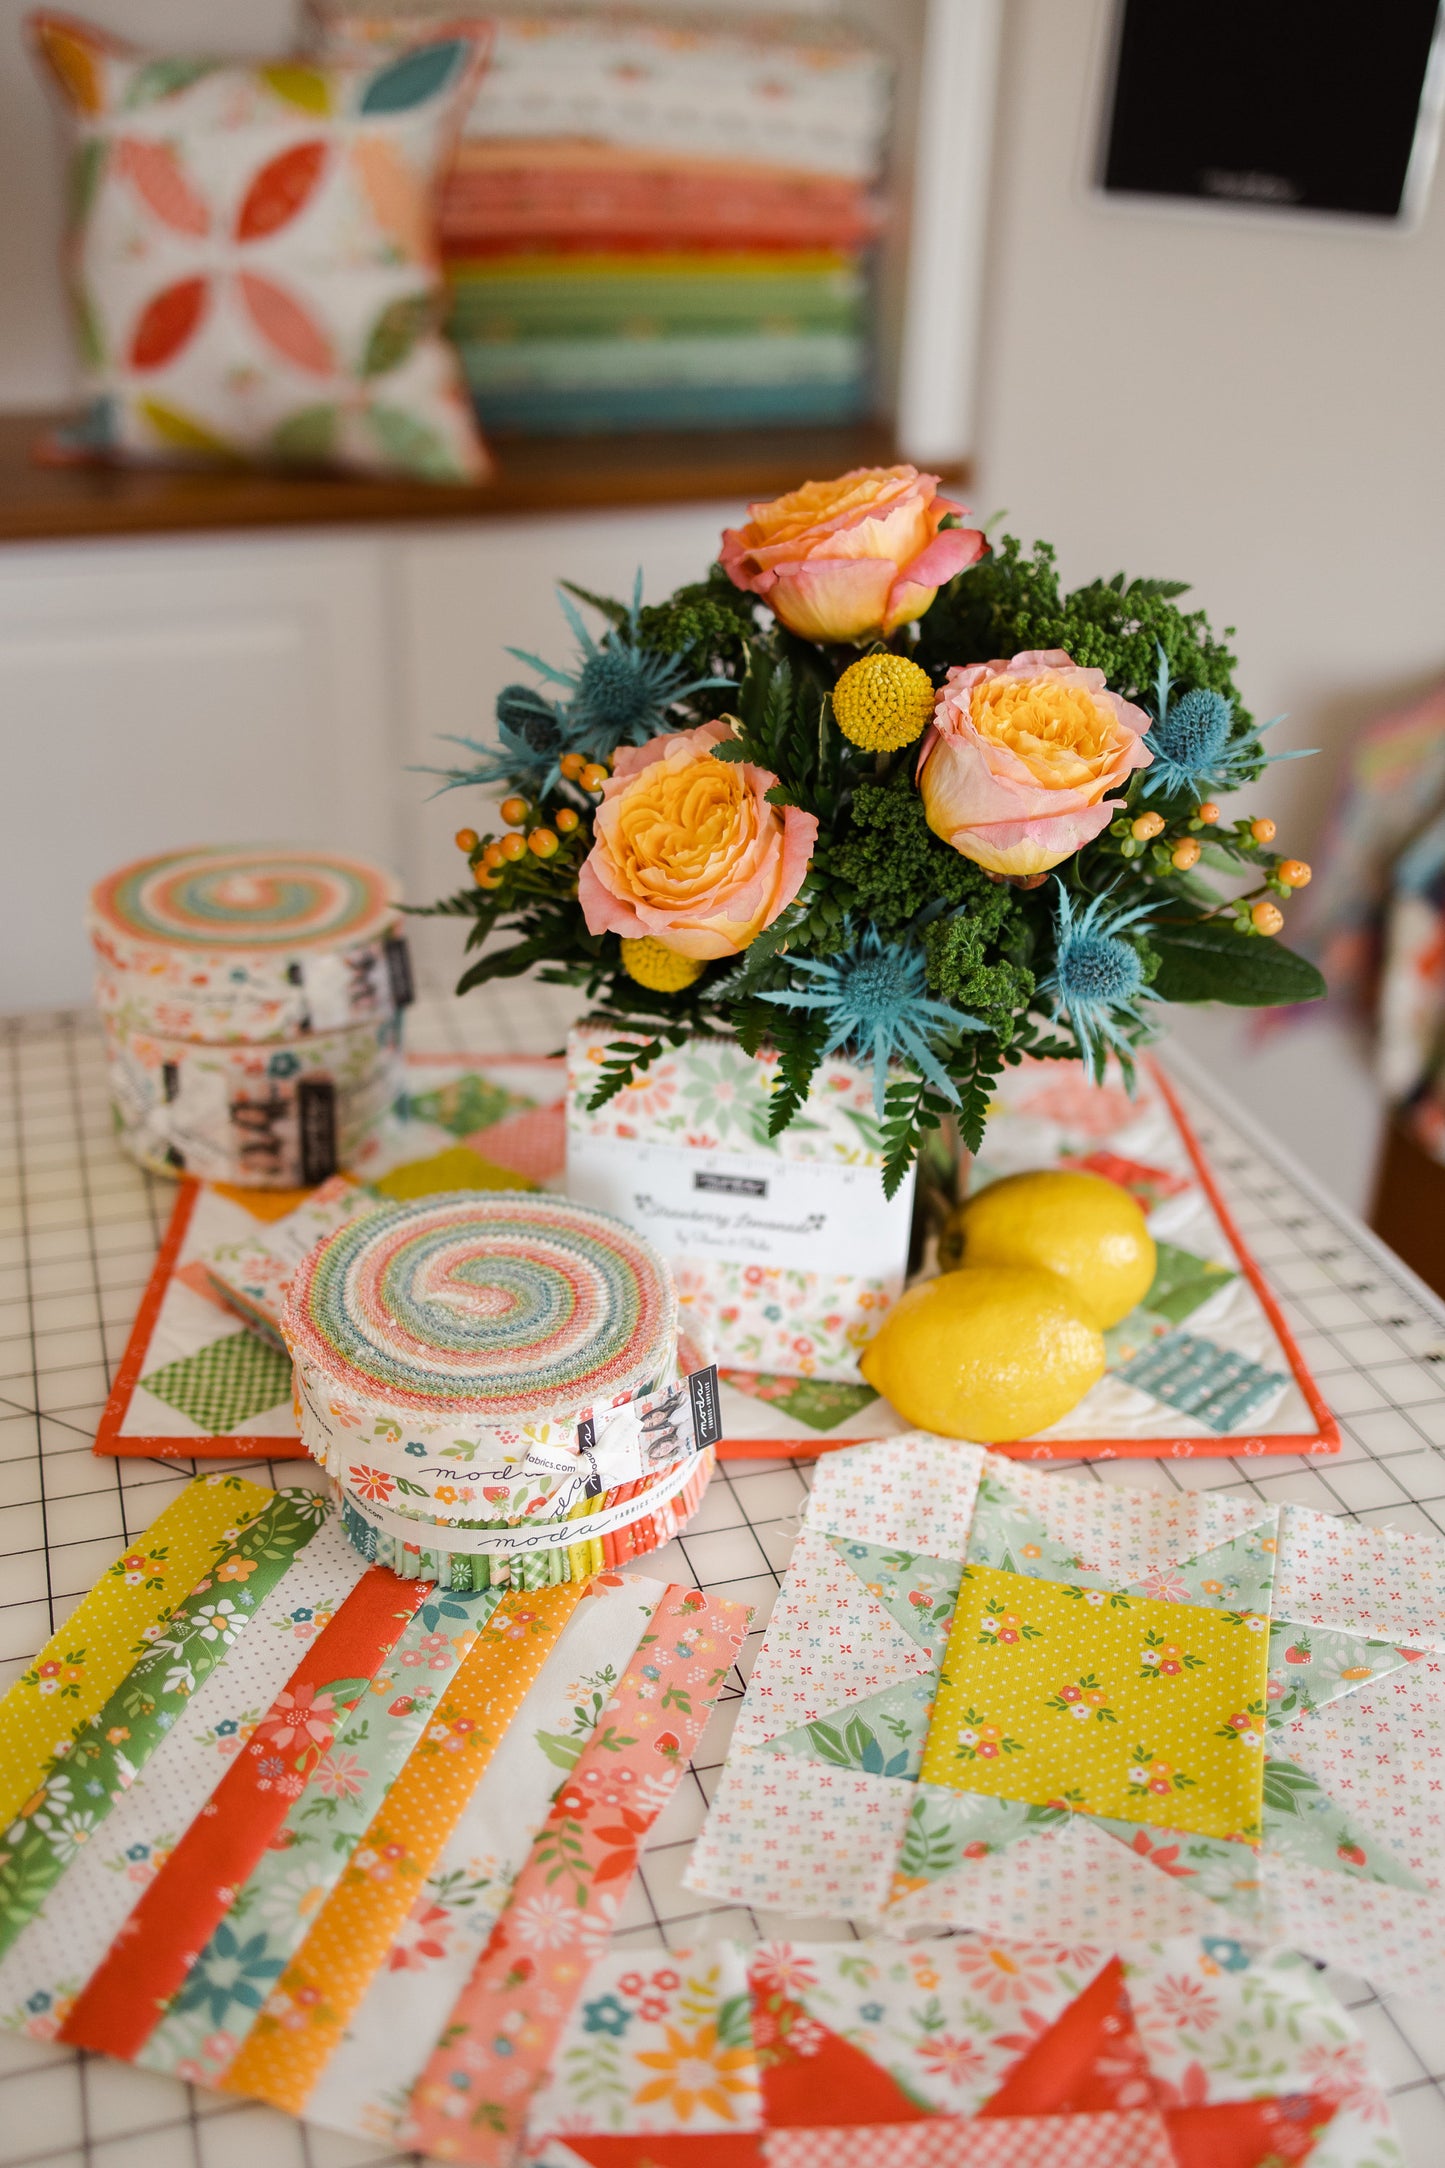 Strawberry Lemonade Bouquets Florals Dots in Apricot by Sherri & Chelsi for Moda. Continuous cuts of Quilter's Cotton Fabric